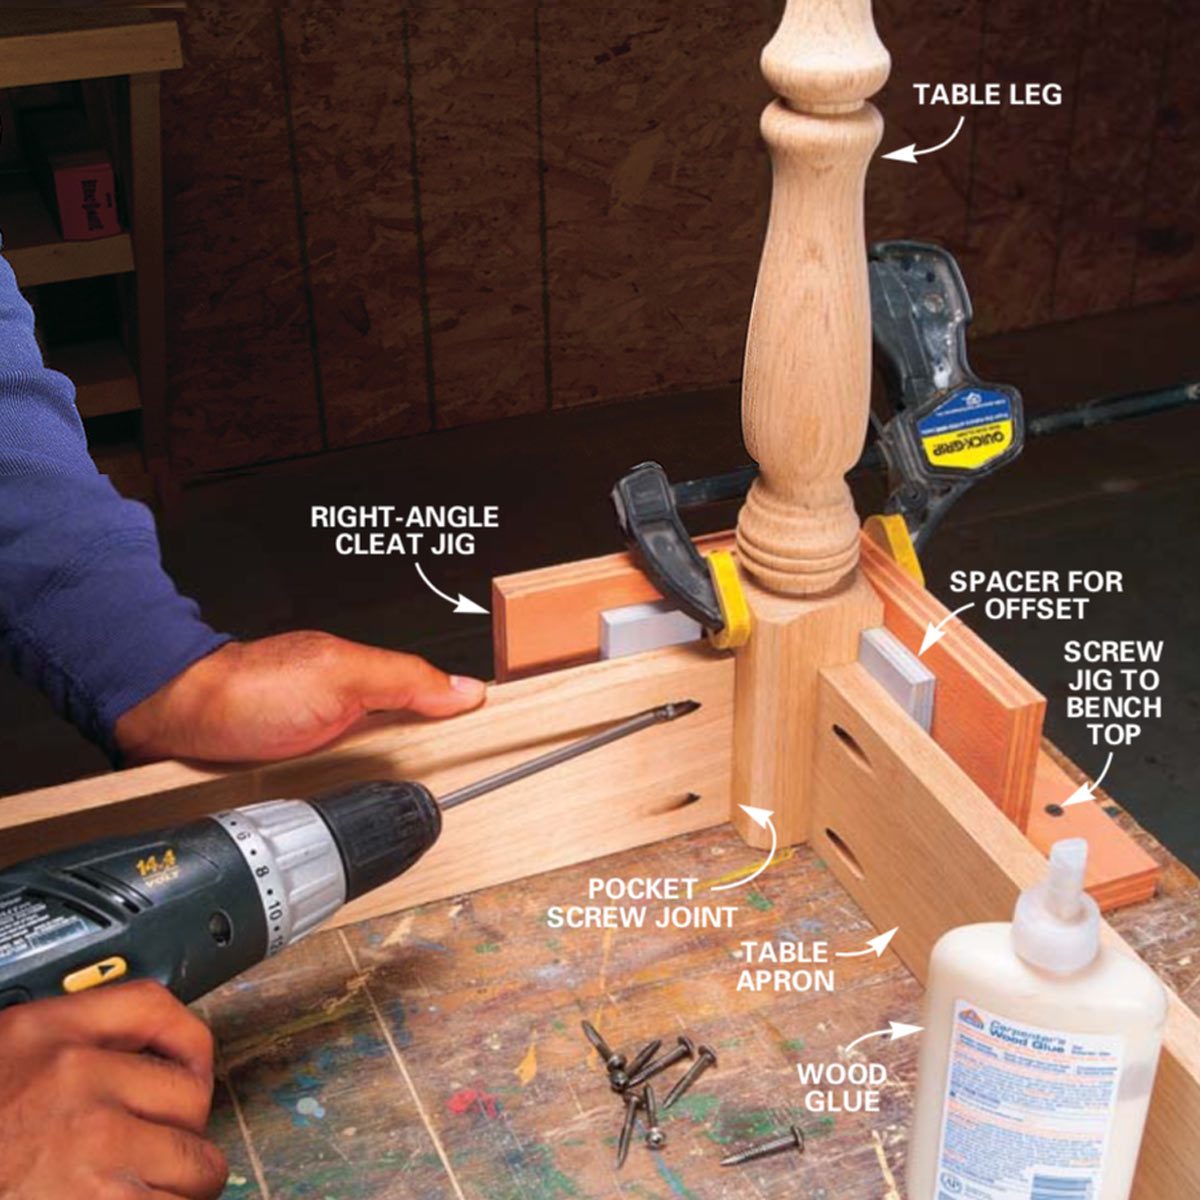 How to Use a Kreg Jig: 11 Steps (with Pictures) - wikiHow